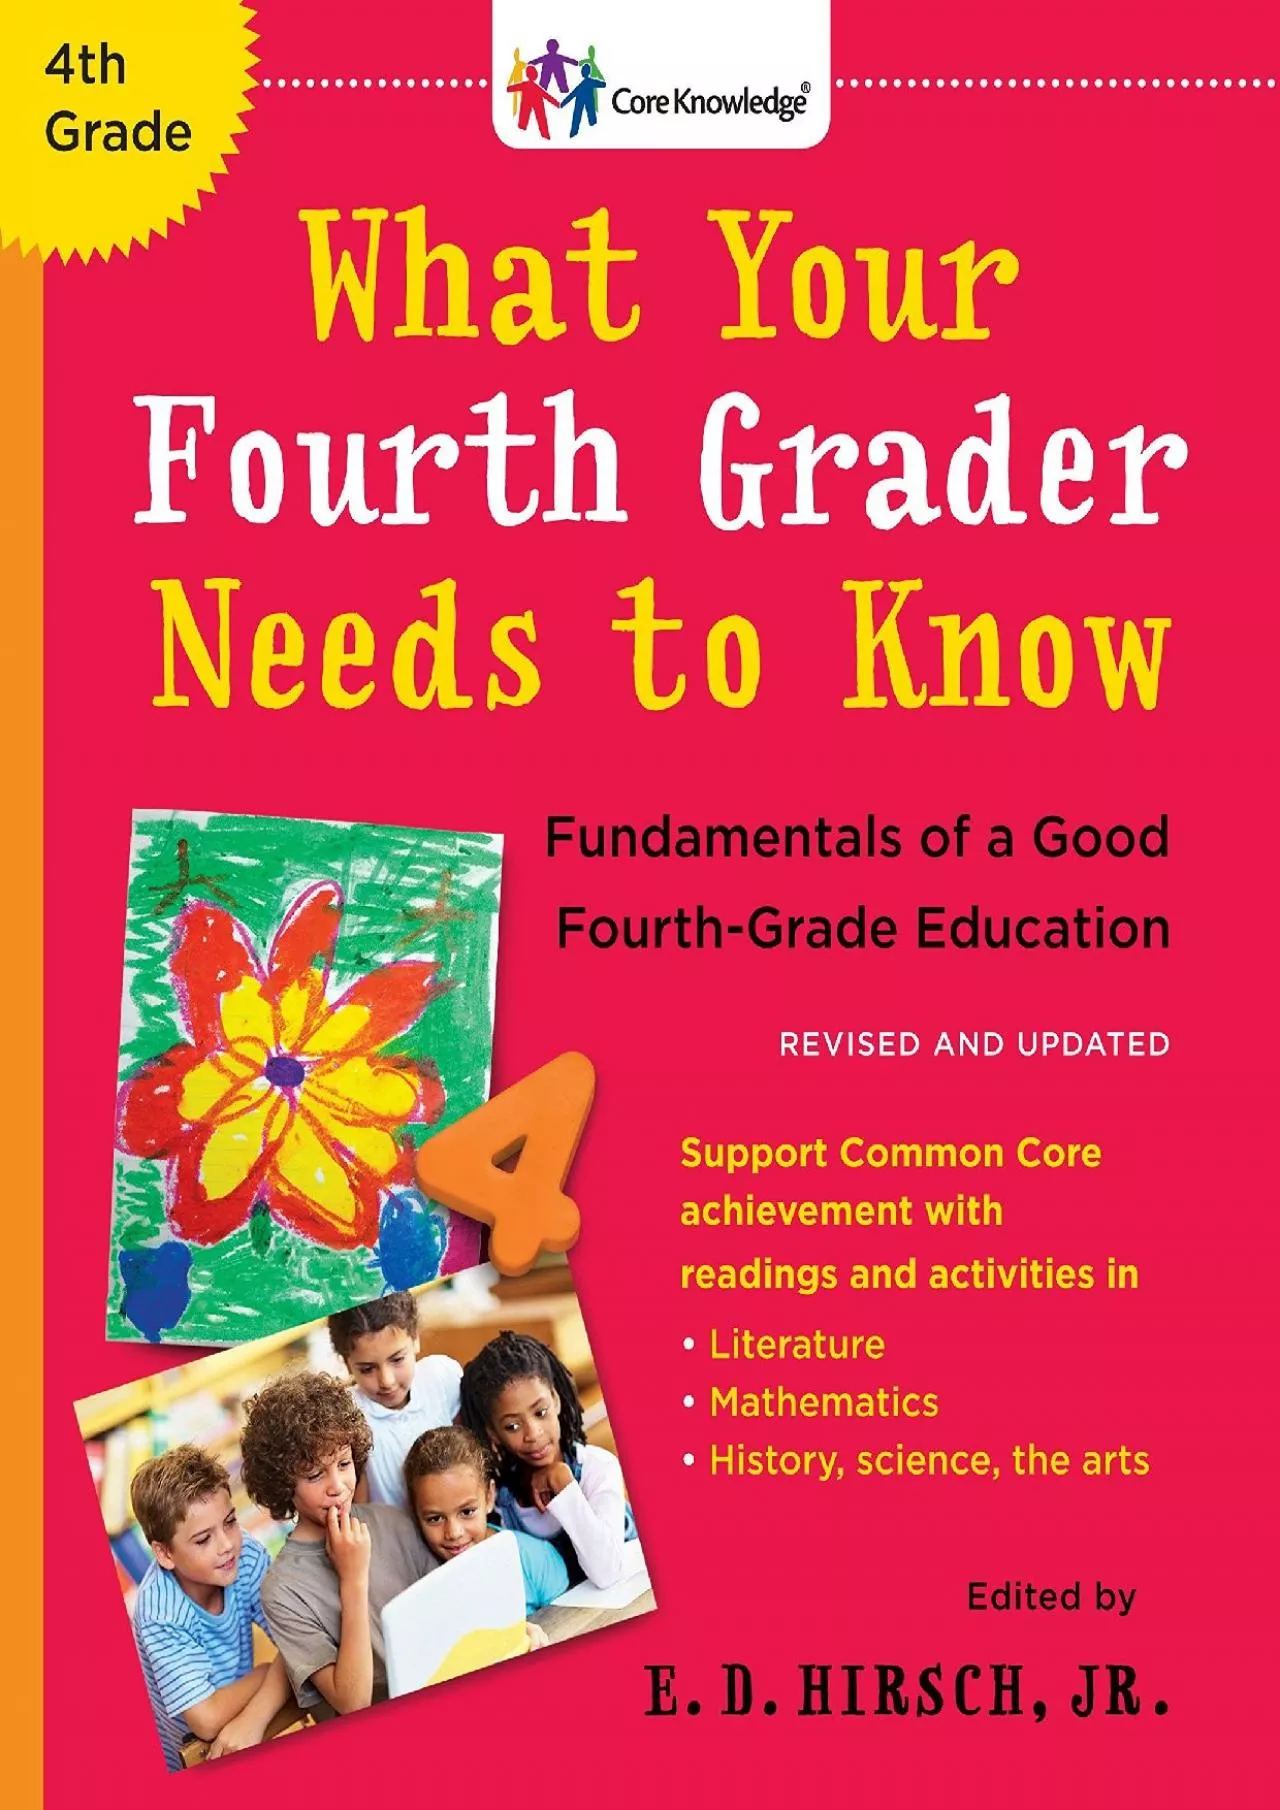 [EBOOK] What Your Fourth Grader Needs to Know (Revised and Updated): Fundamentals of a